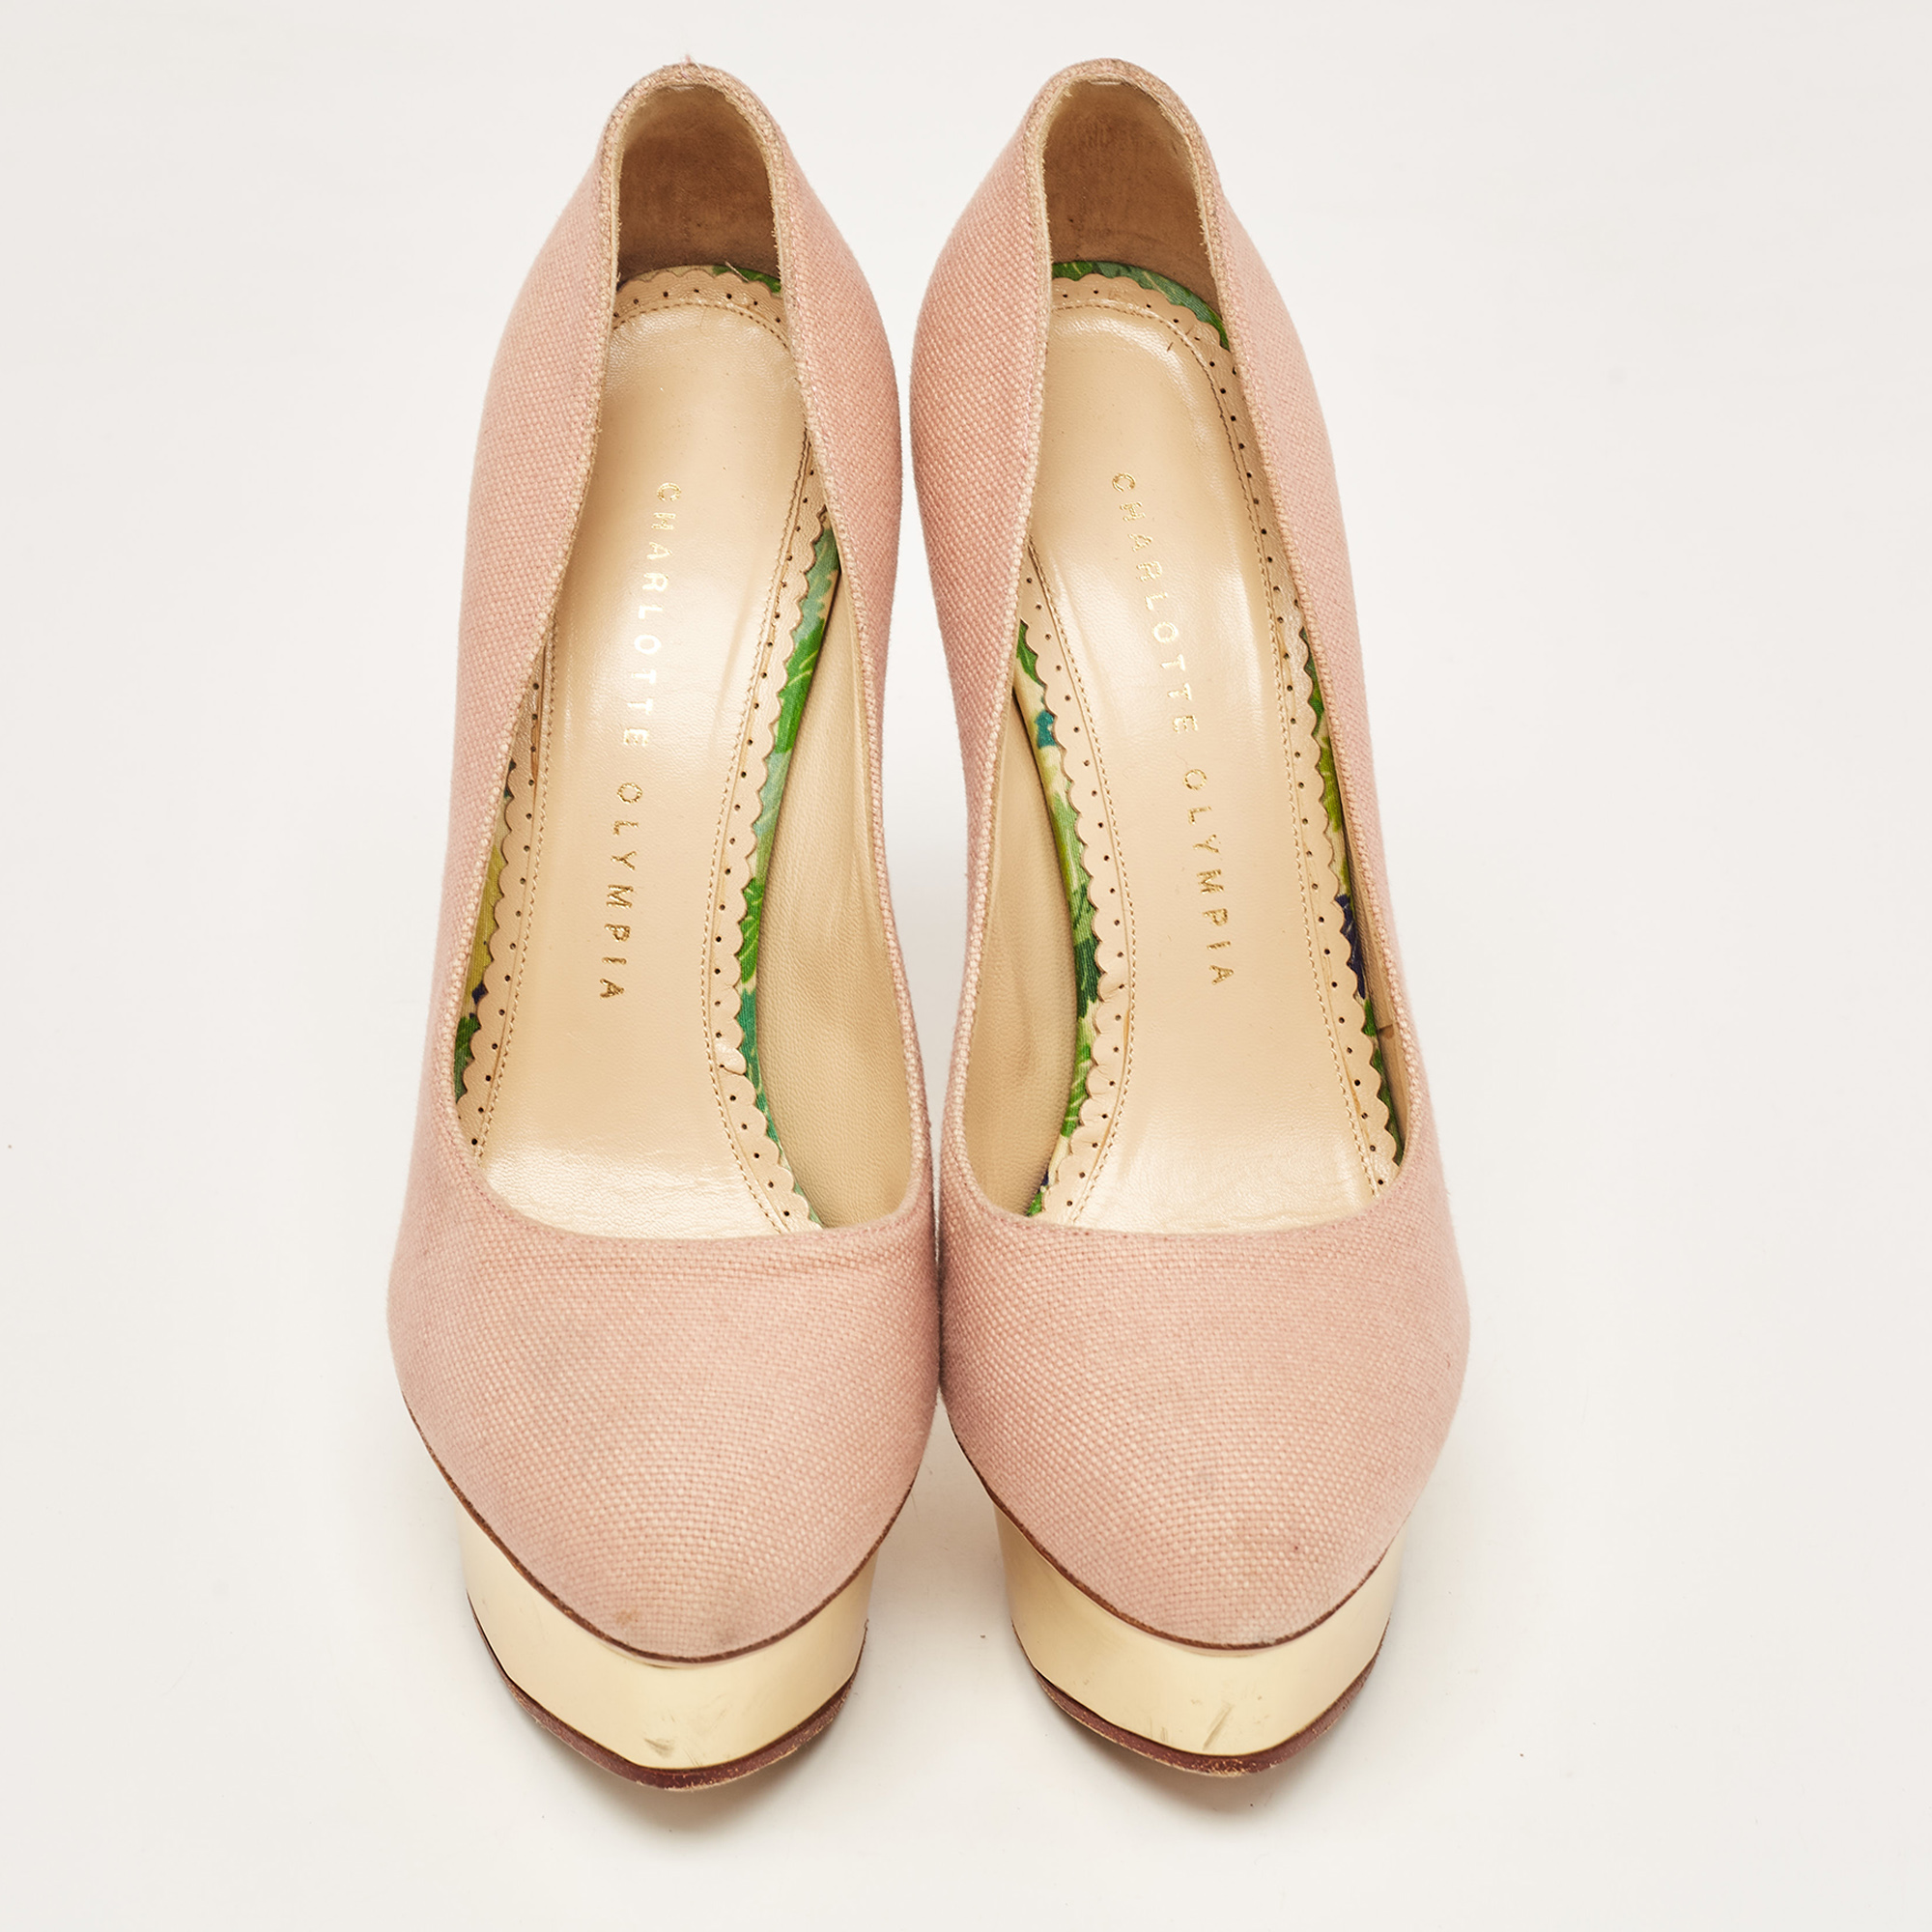 Charlotte Olympia Pink Canvas Dolly Platform Pumps Size 38